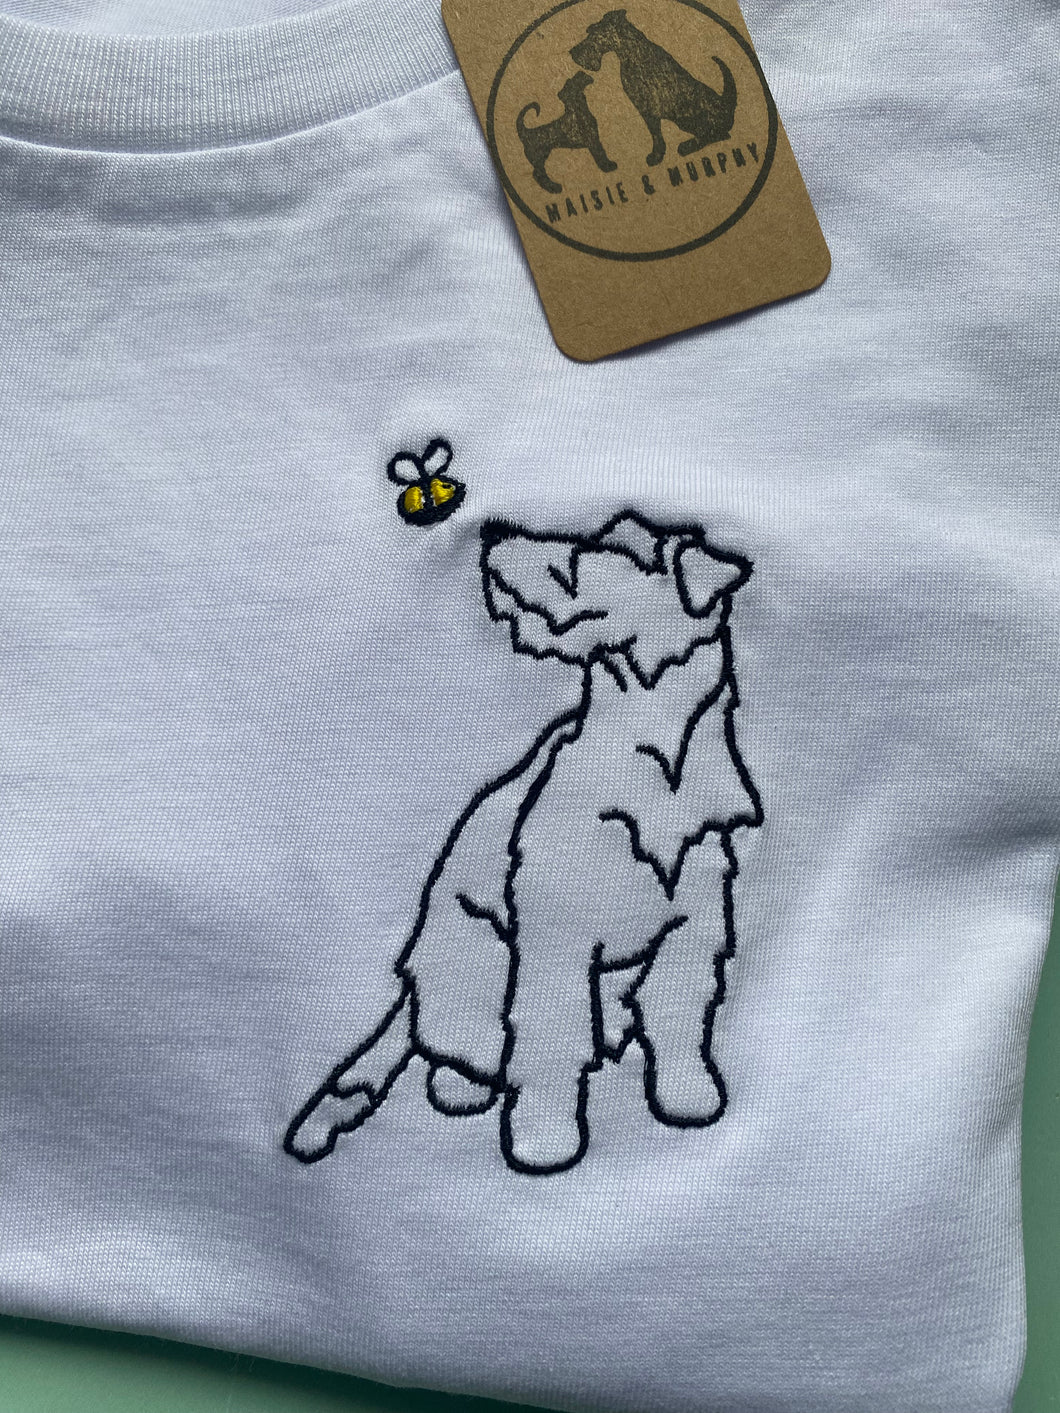 Rough Coat Jack Russell Terrier Outline Sweatshirt - Gifts for Jack Russell terrier owners and lovers.